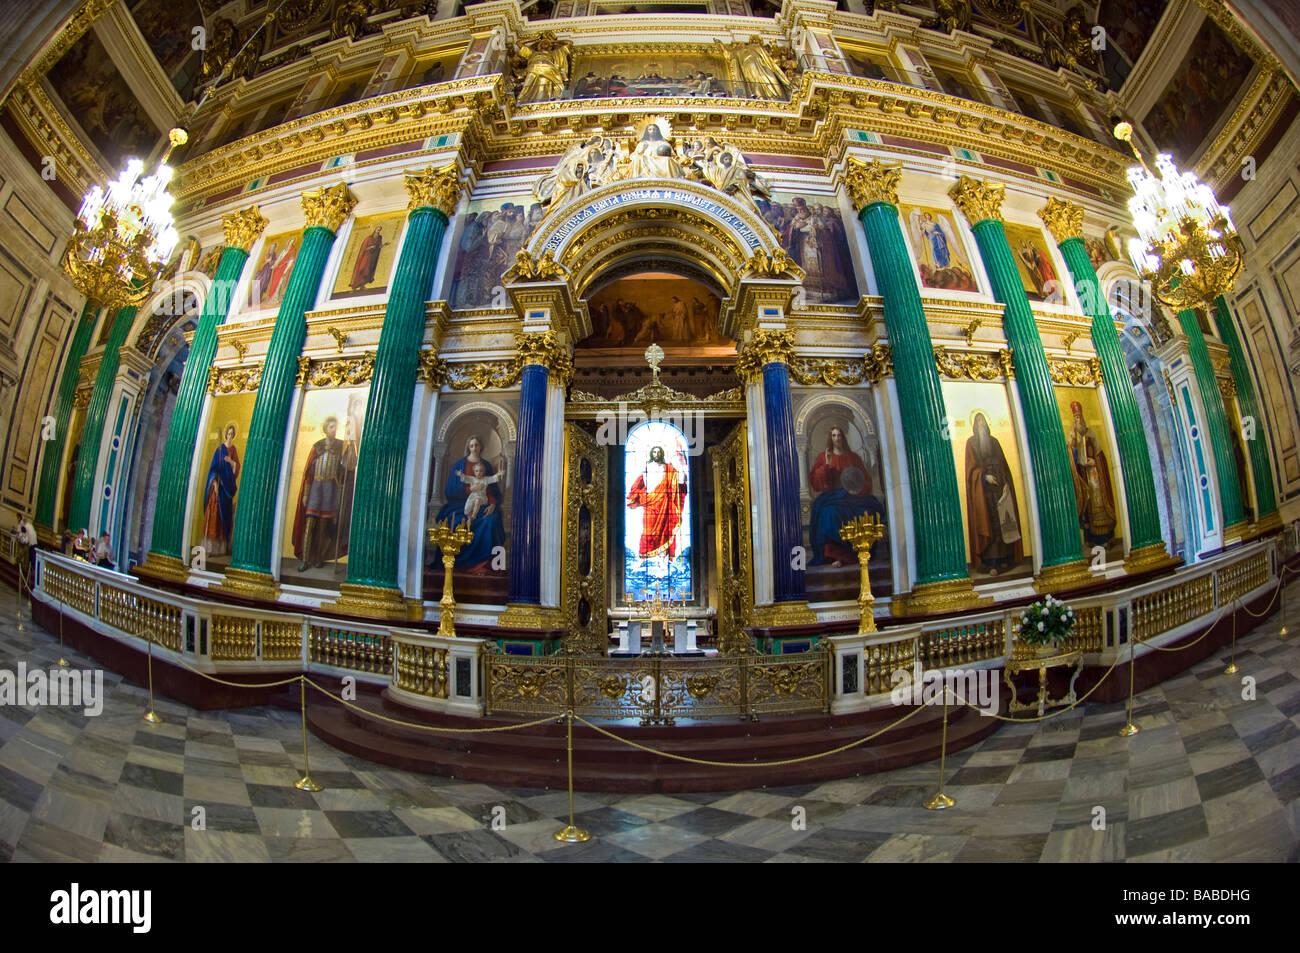 Wide Angle Interior of Saint Isaac's Cathedral Showing the Eight Malachite Columns and Iconostasis. Saint Petersburg, Russia. Stock Photo